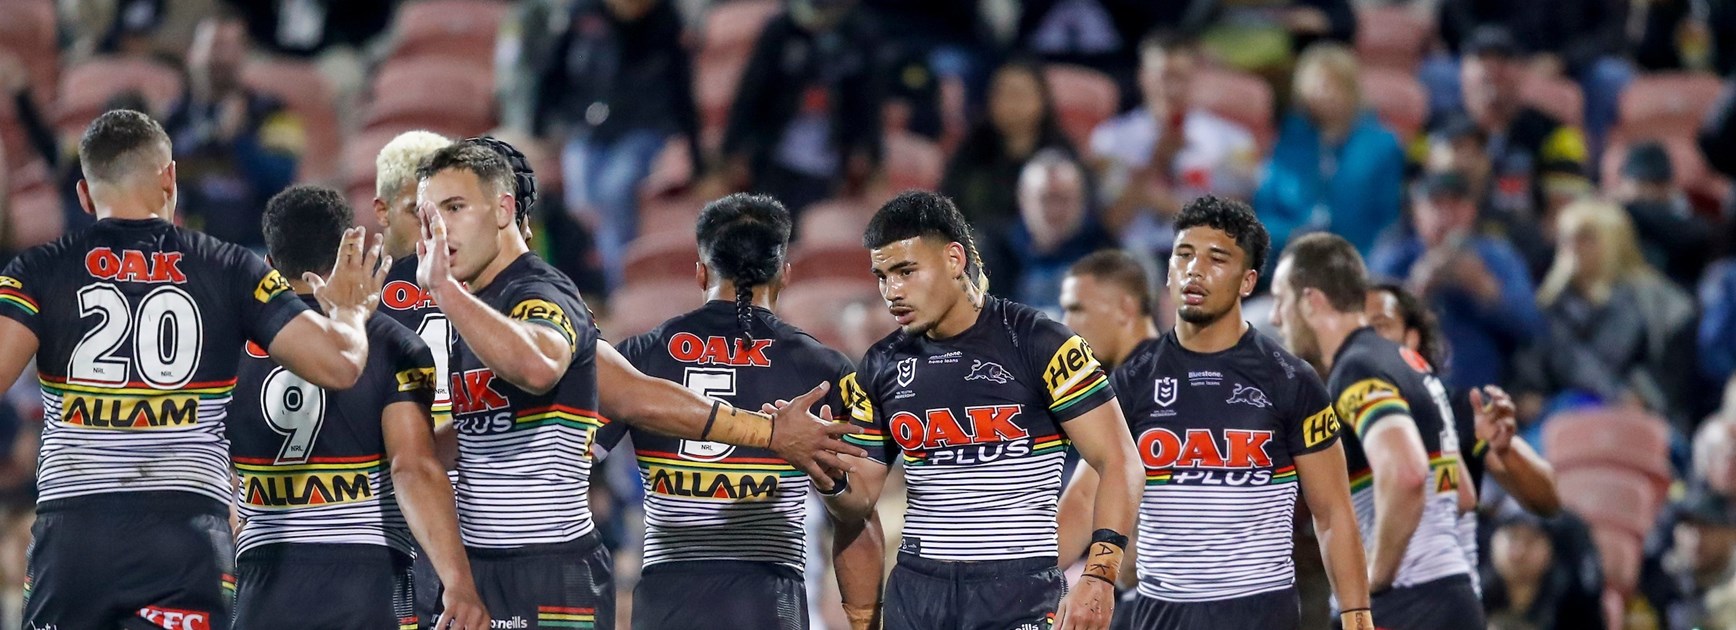 Luai returns in style as Panthers overpower Warriors